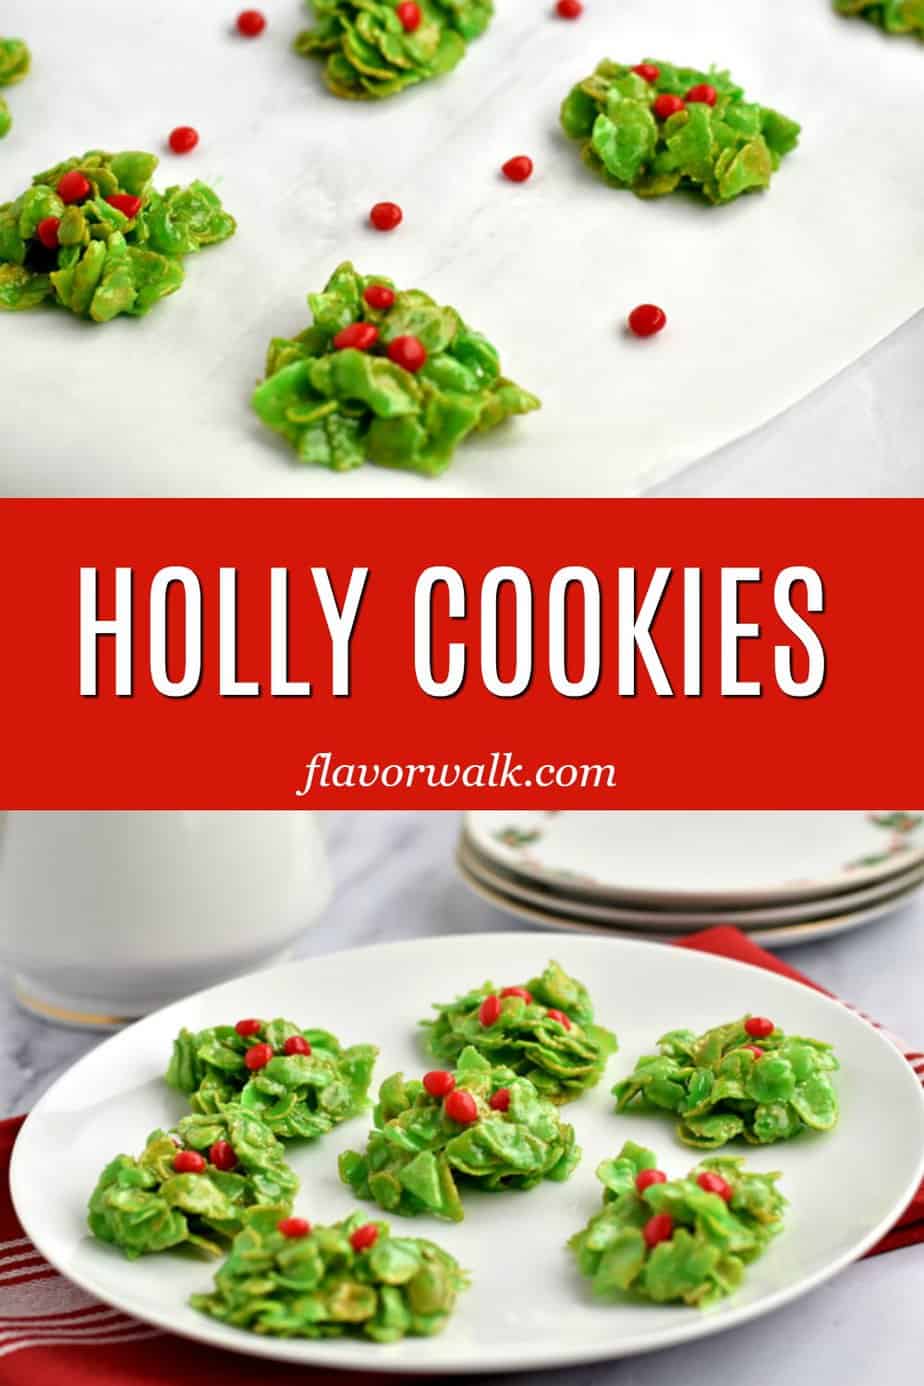 Top image is holly cookies and red candies on parchment paper. Bottom image is a white plate filled with holly cookies and the middle has a red text box.